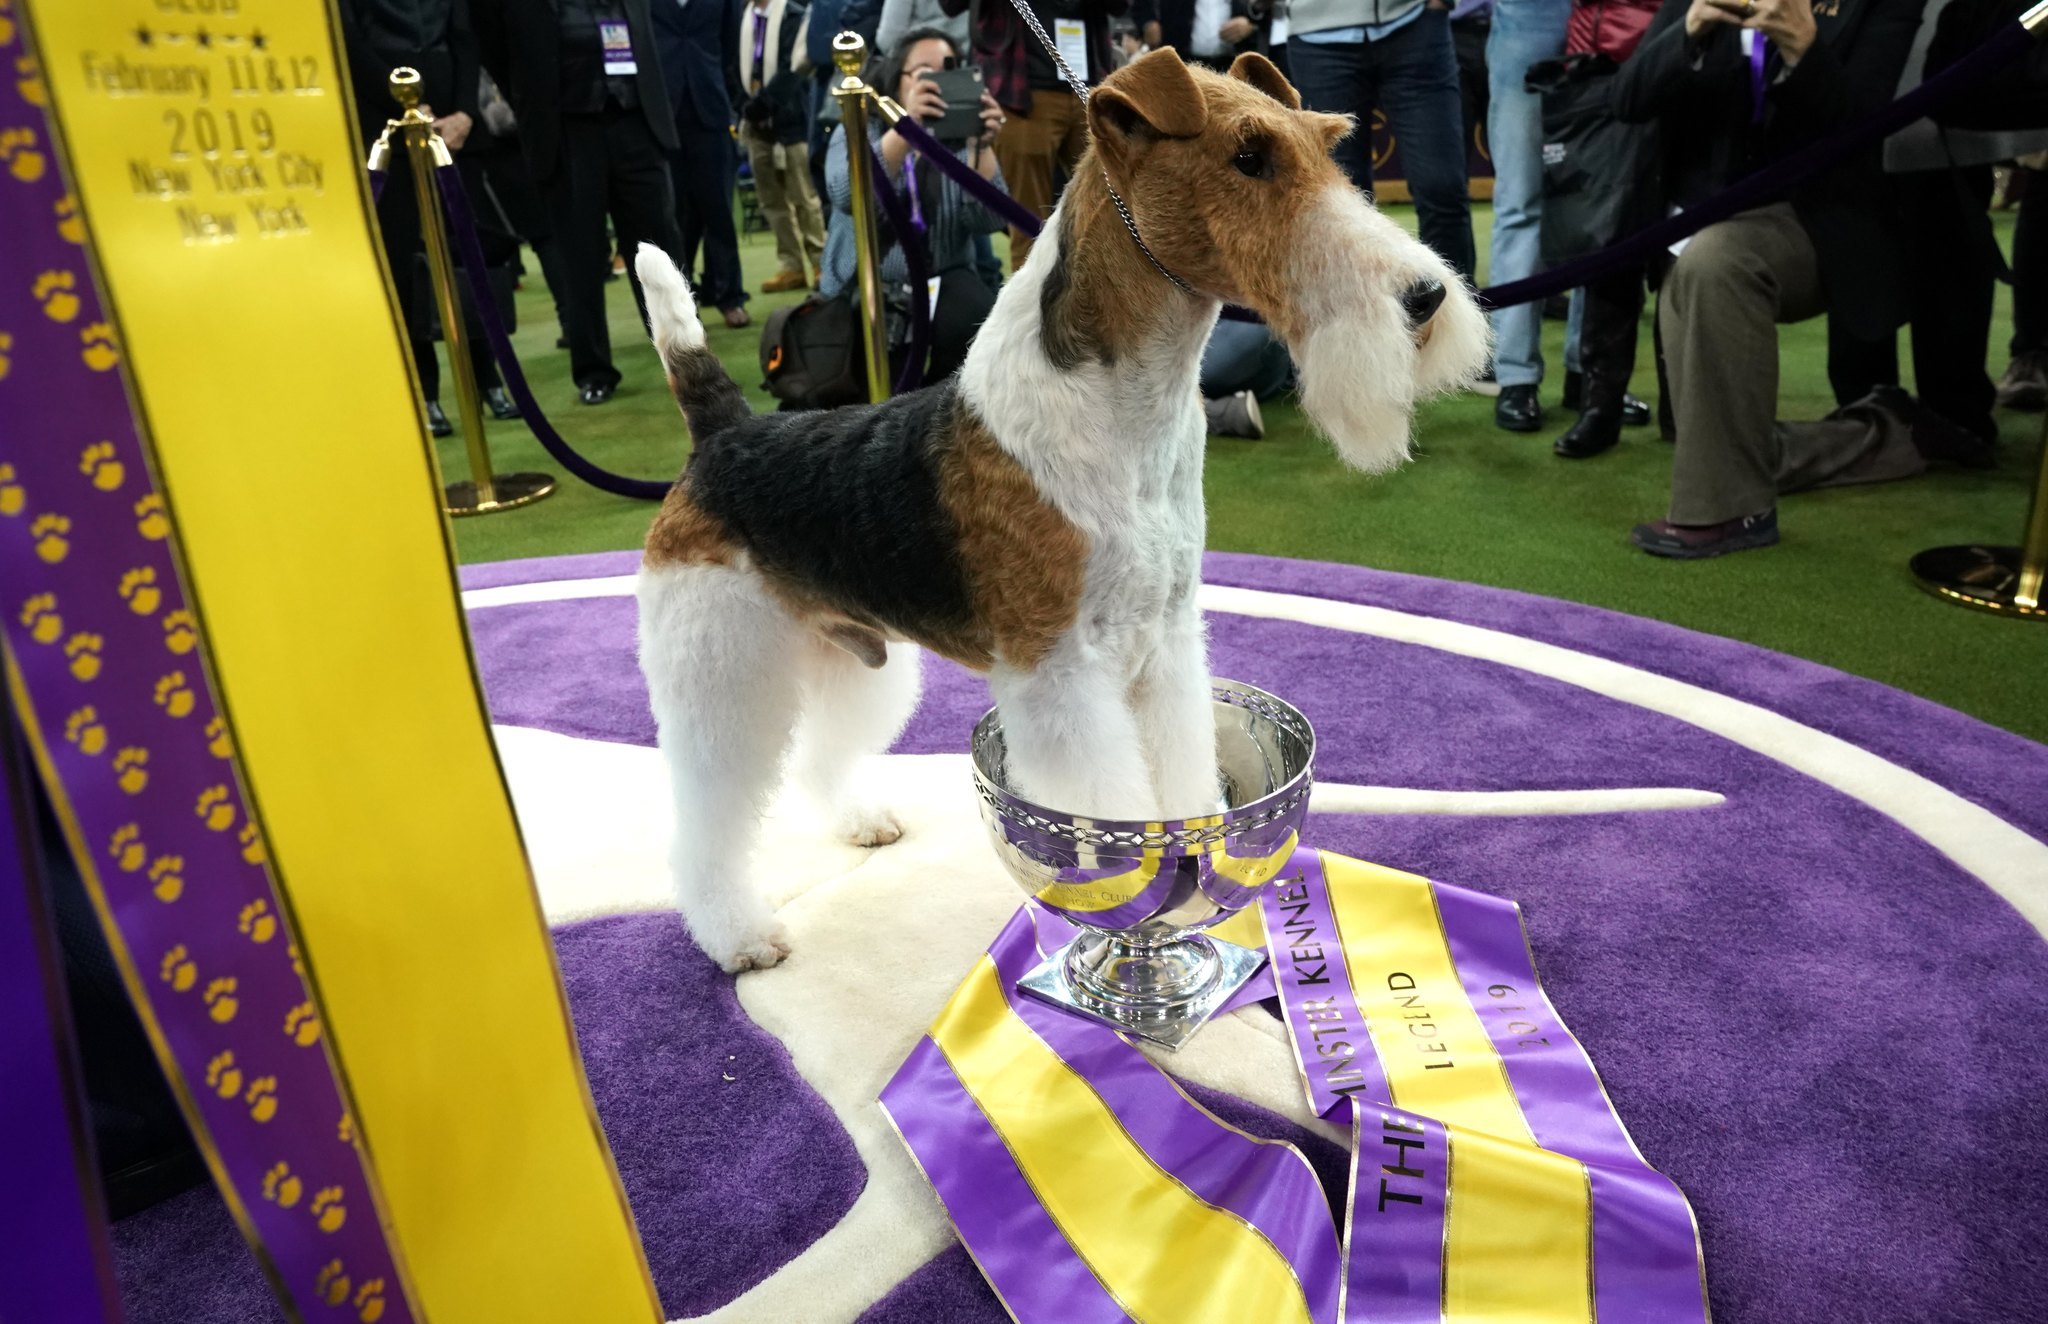 Westminster Kennel Club Dog Show 2019: Meet the best of the good dogs - Orlando Sentinel2048 x 1324